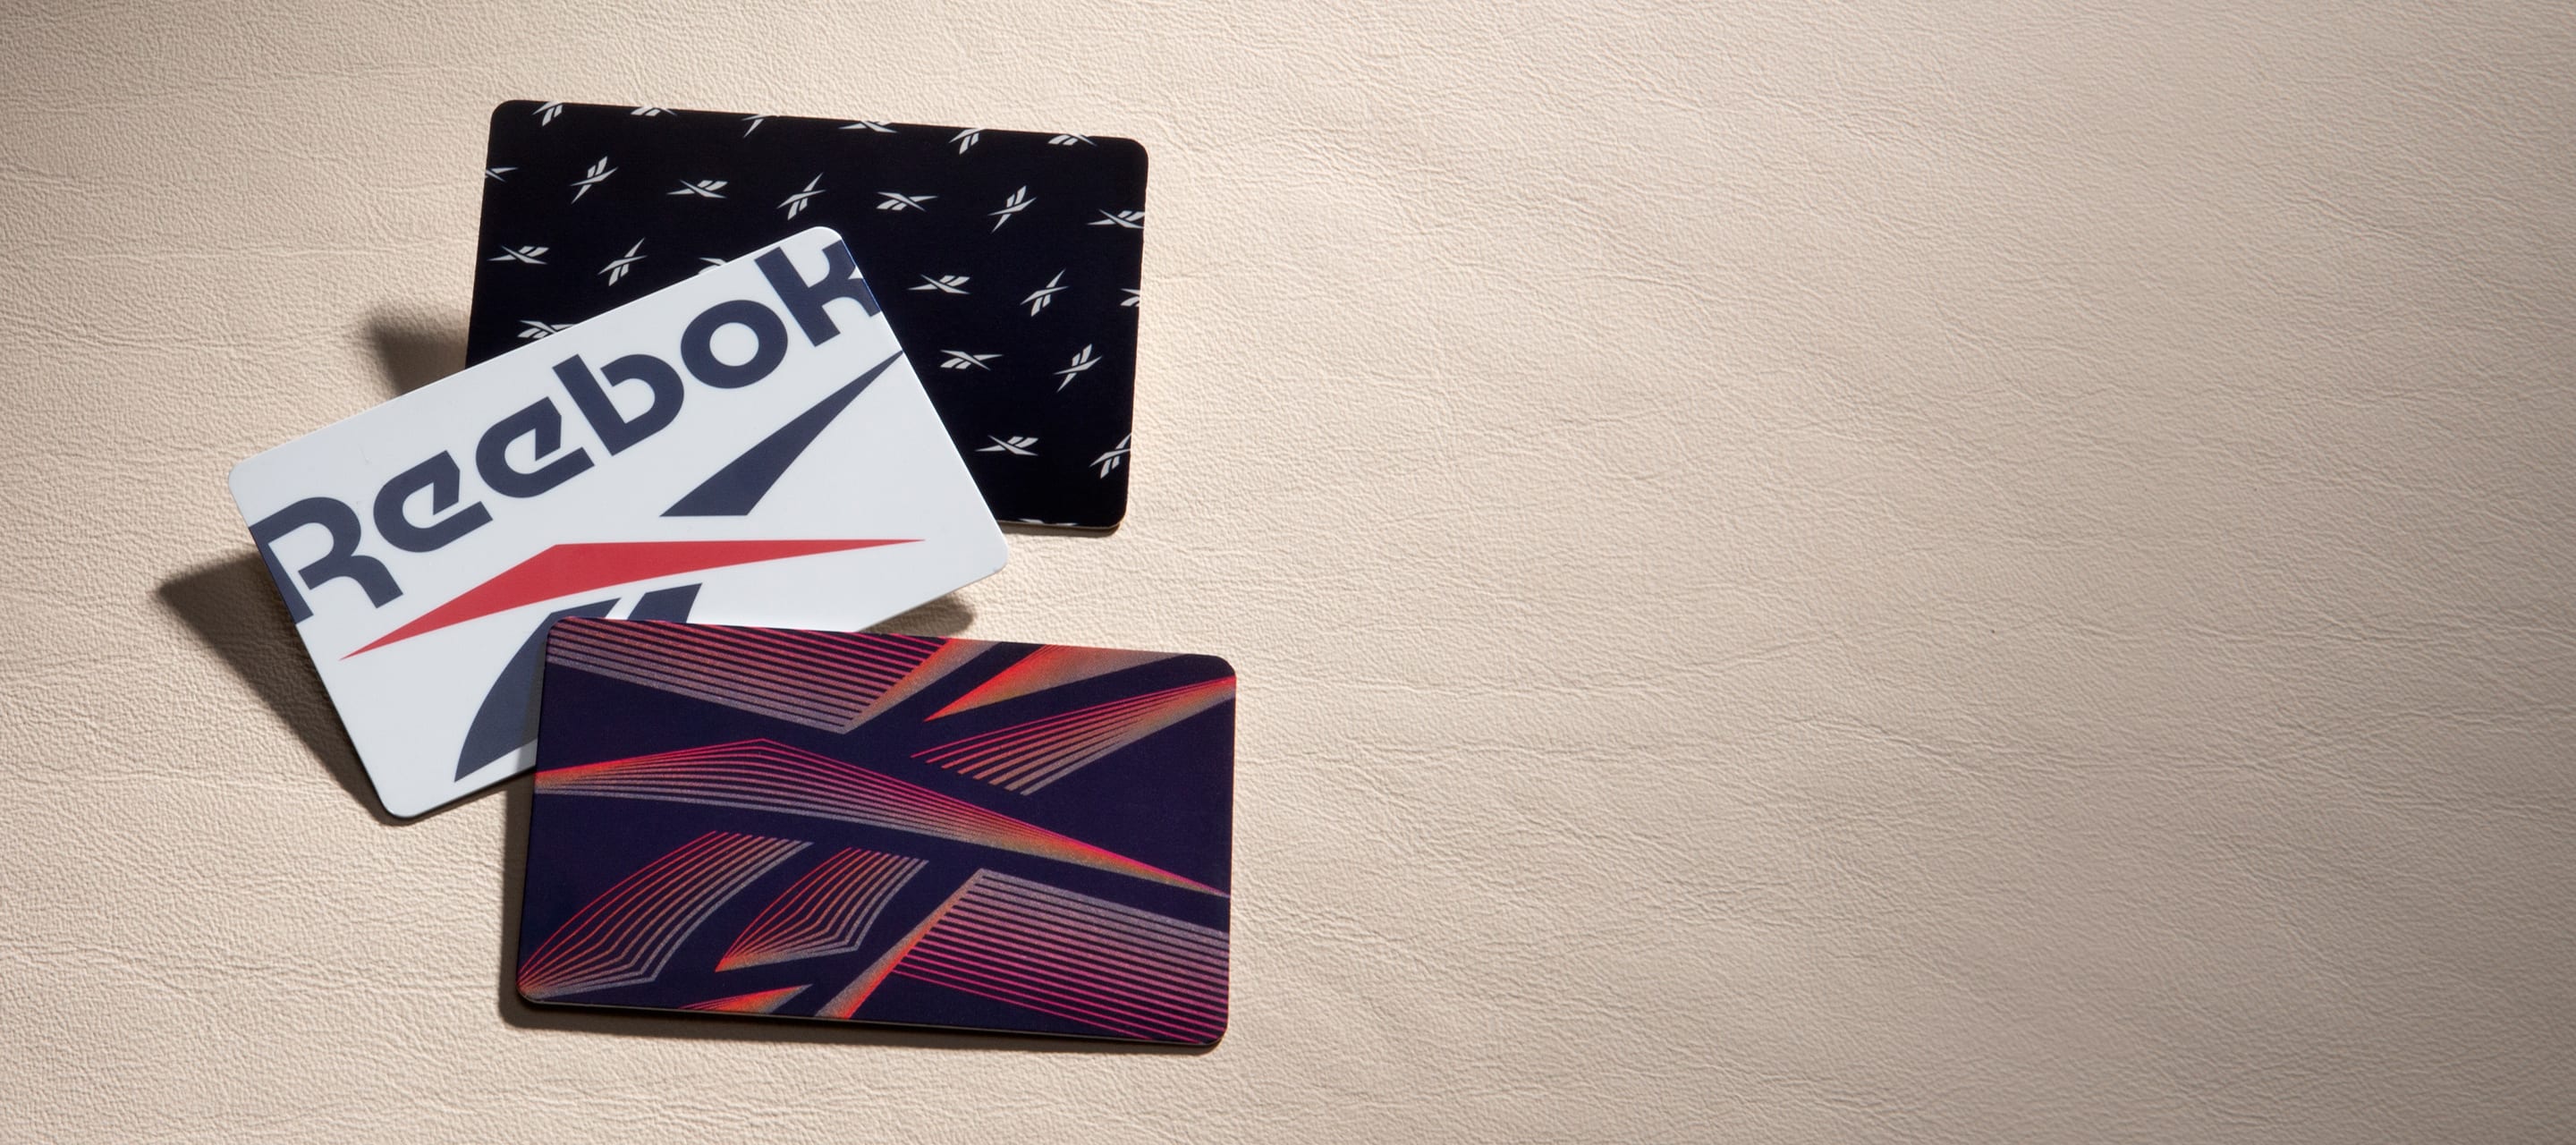 Where to Purchase Reebok Gift Cards?